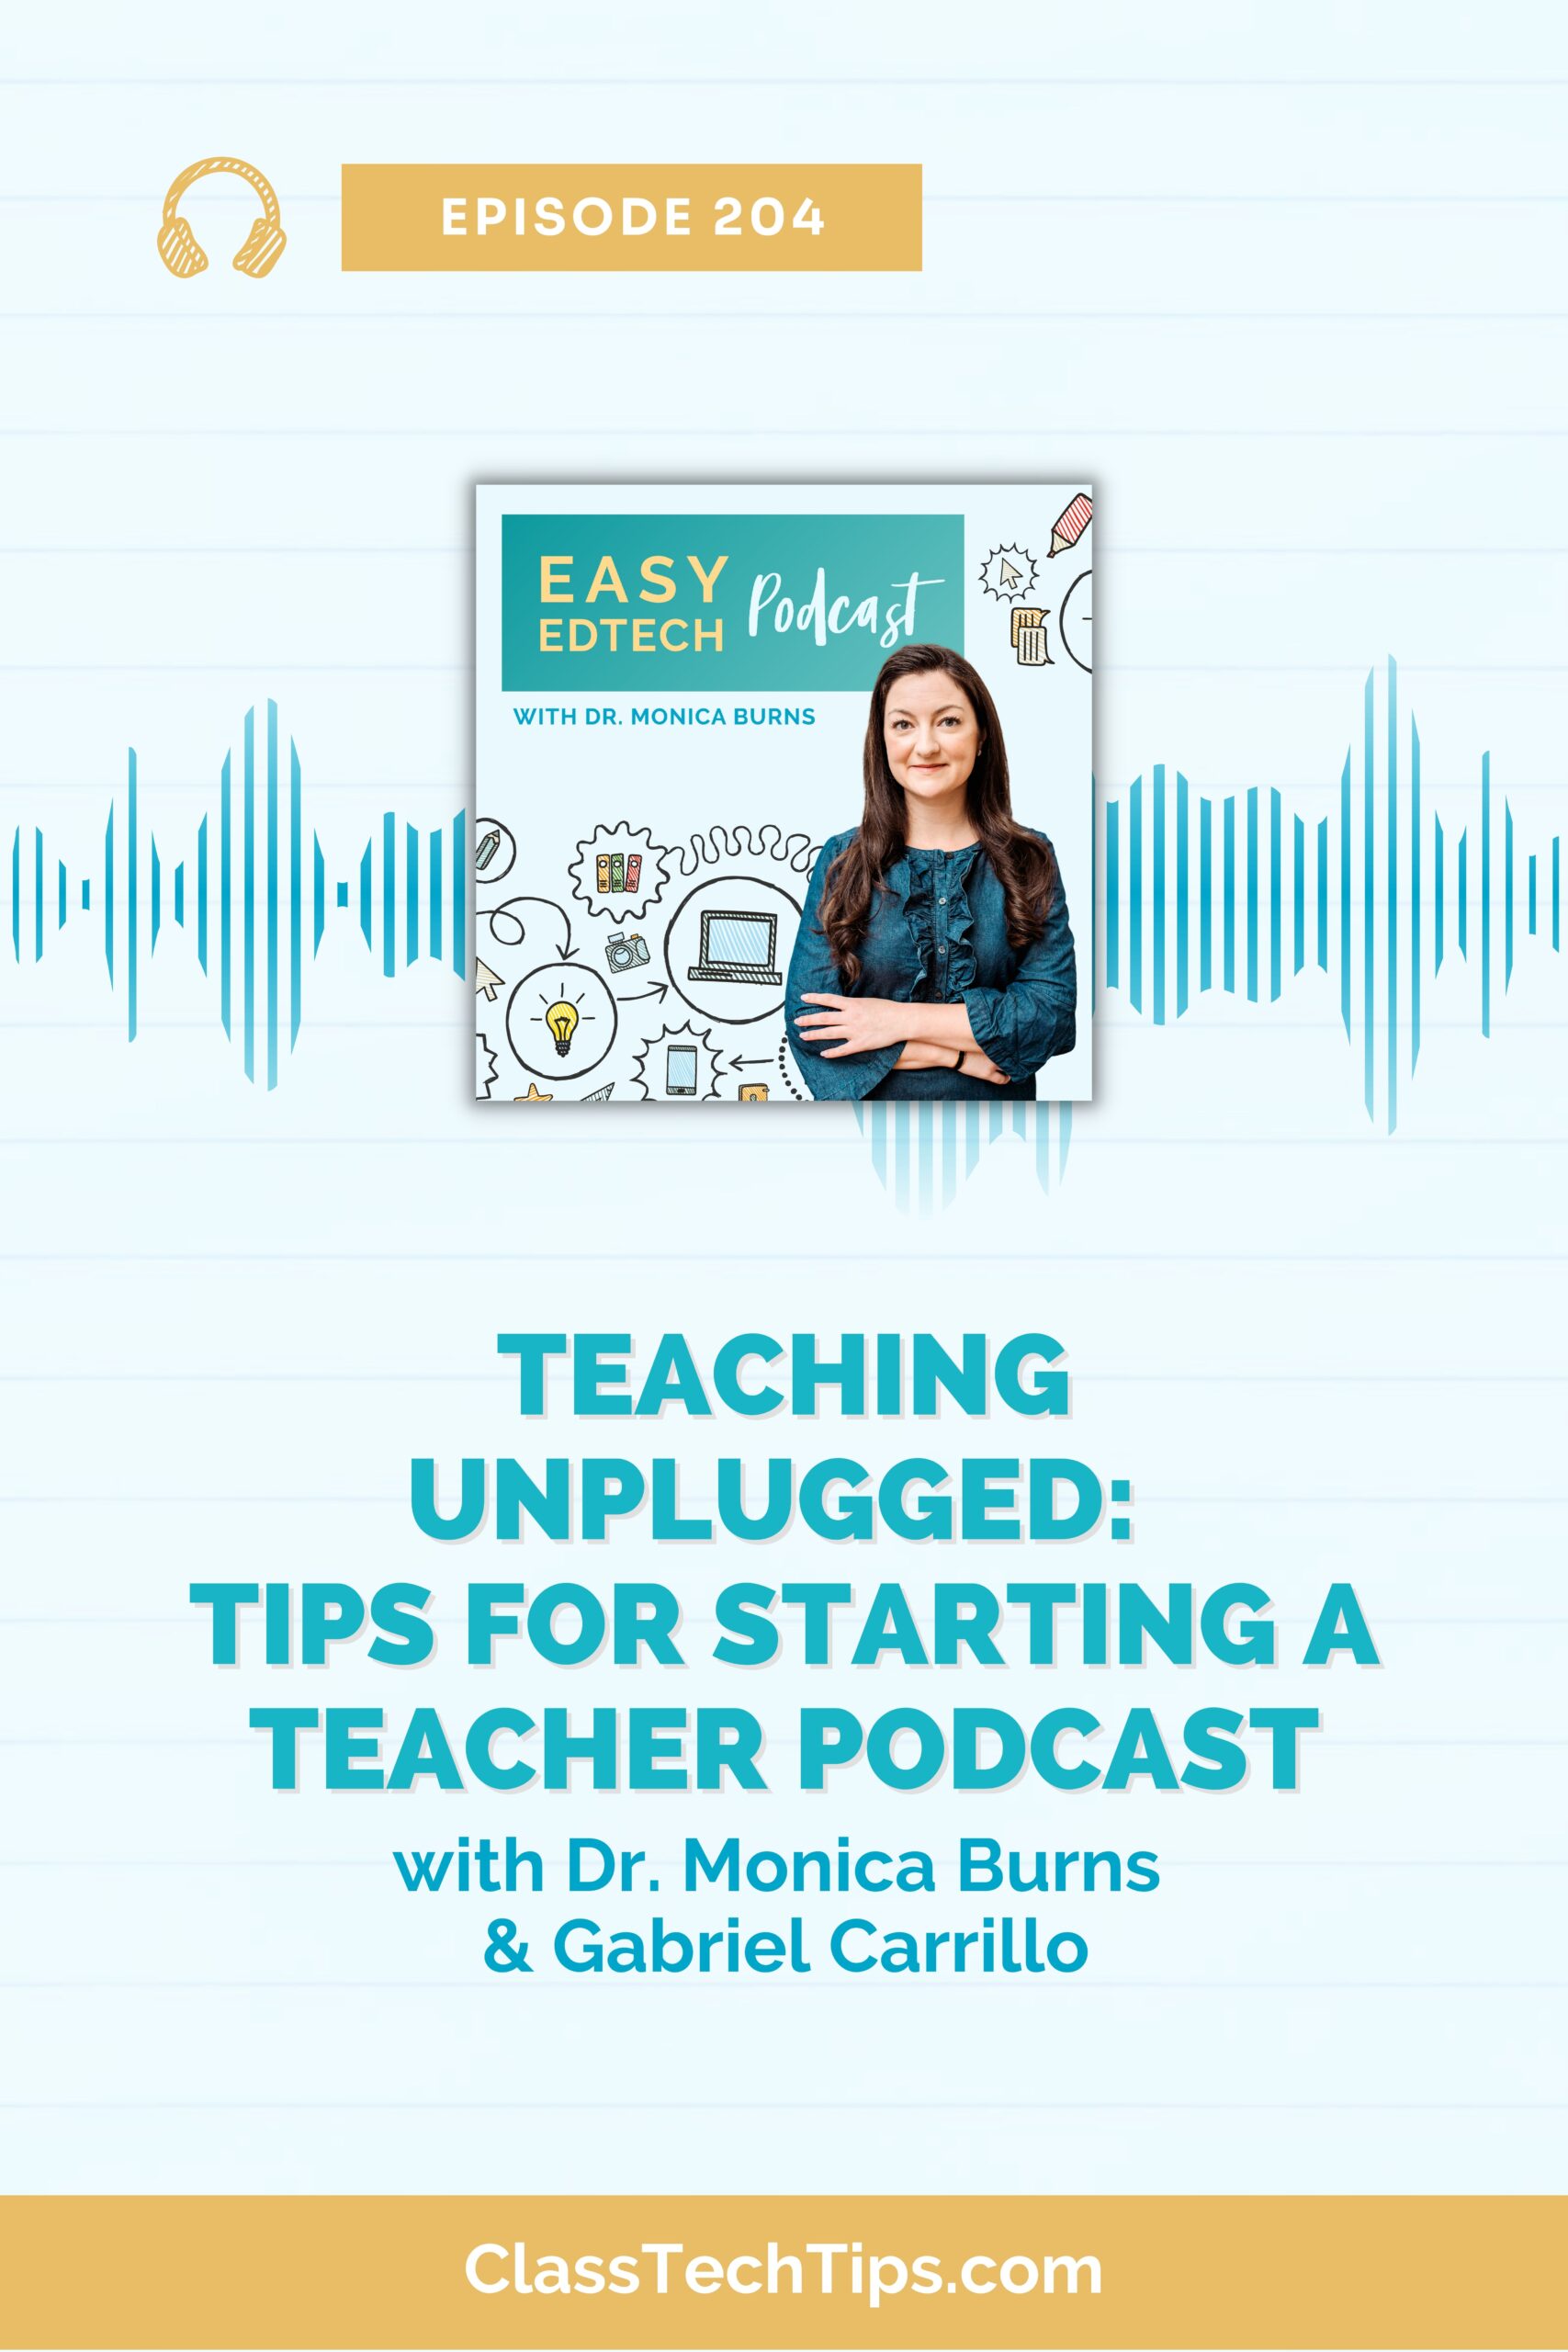 Teaching Unplugged Tips for Starting a Teacher Podcast with Gabriel Carrillo - Horizontal